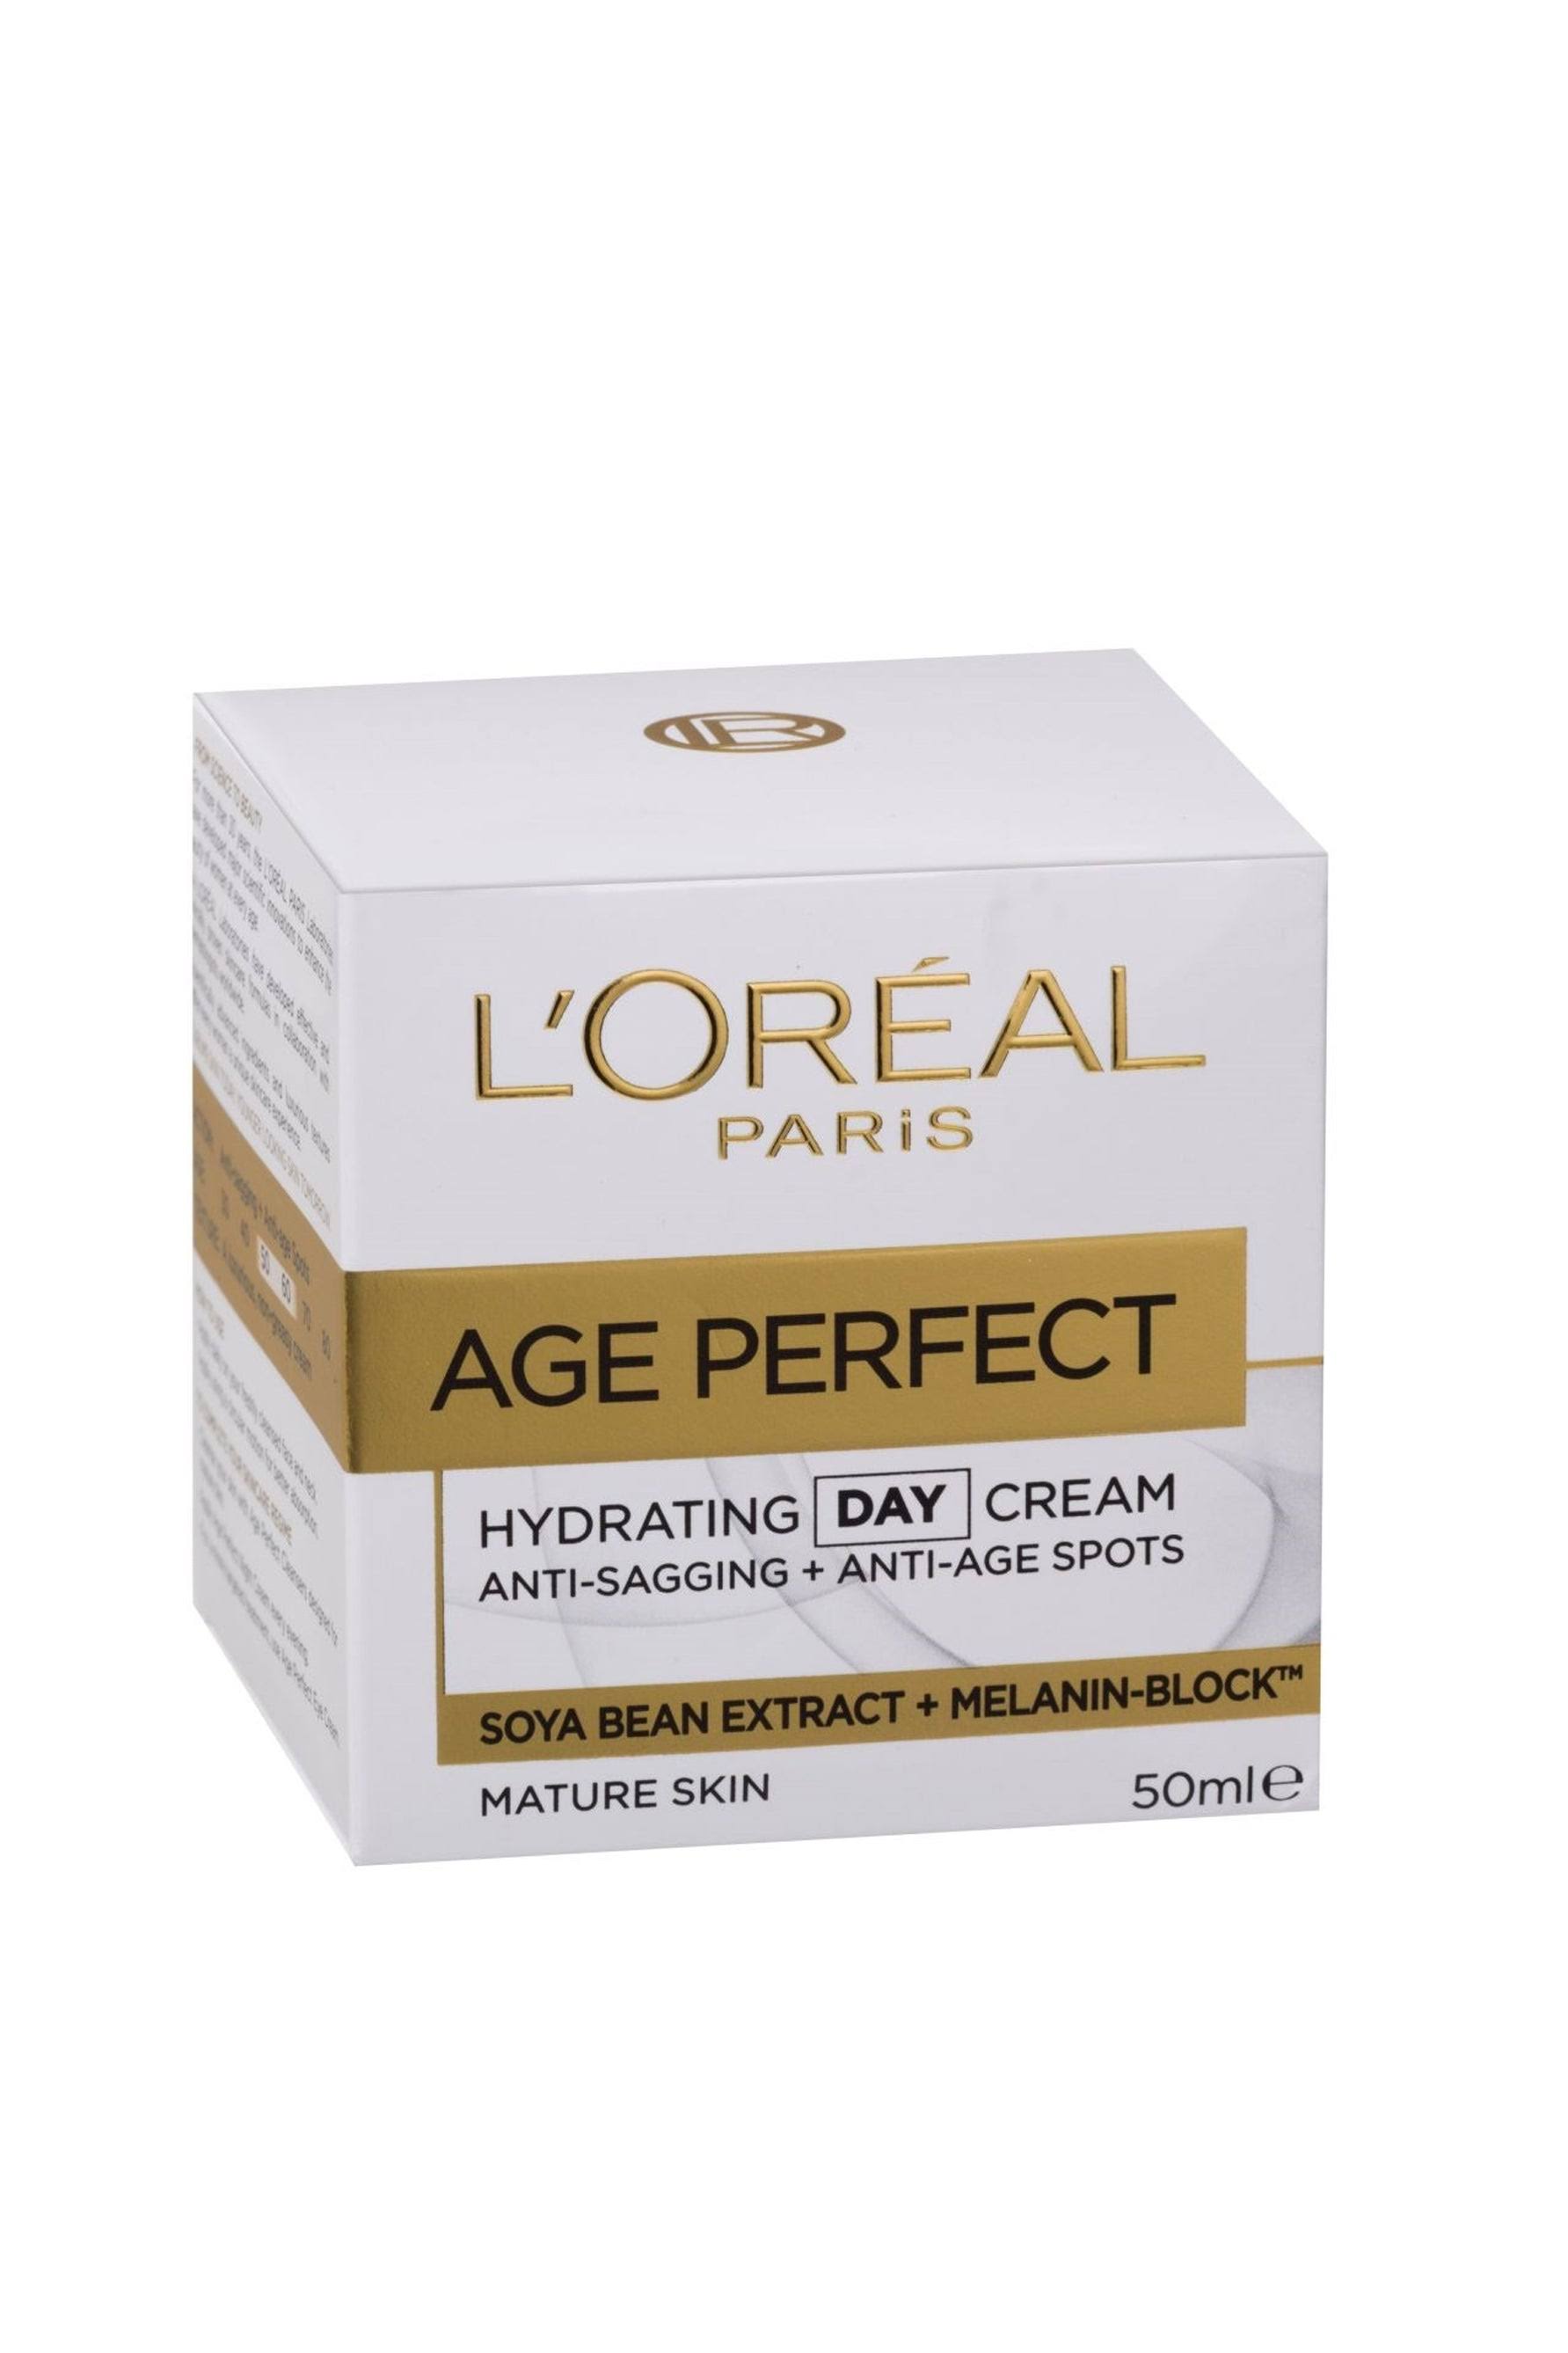 L'Oreal Paris Age Perfect Rehydrating Day Cream - 50ml